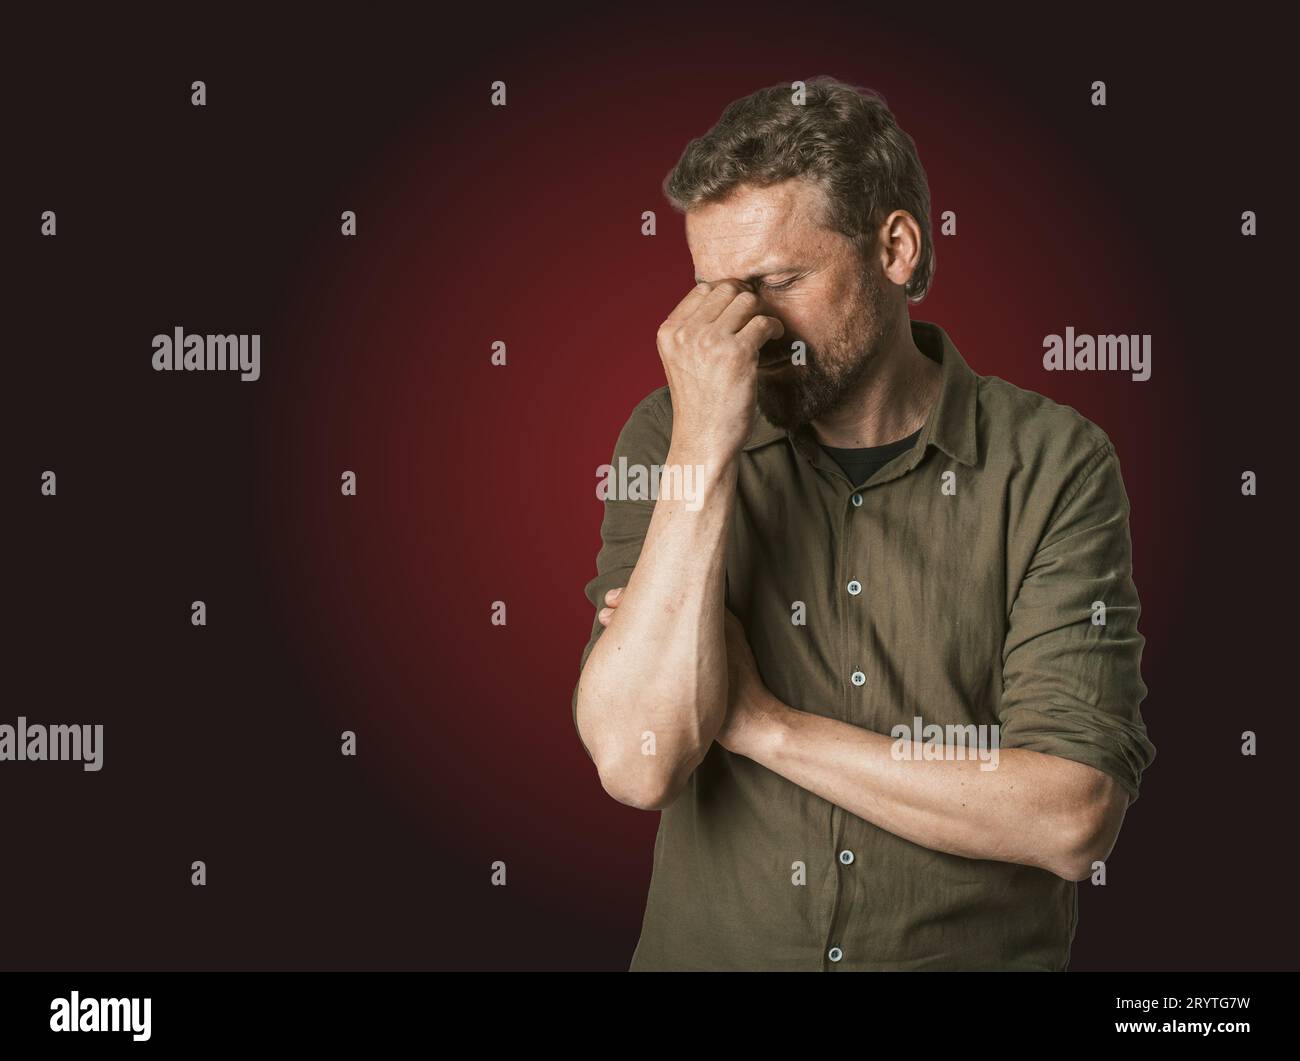 Man facing personal problems and challenges. Mid-aged man with closed eyes, conveying sense of sadness and inner turmoil. Isolat Stock Photo